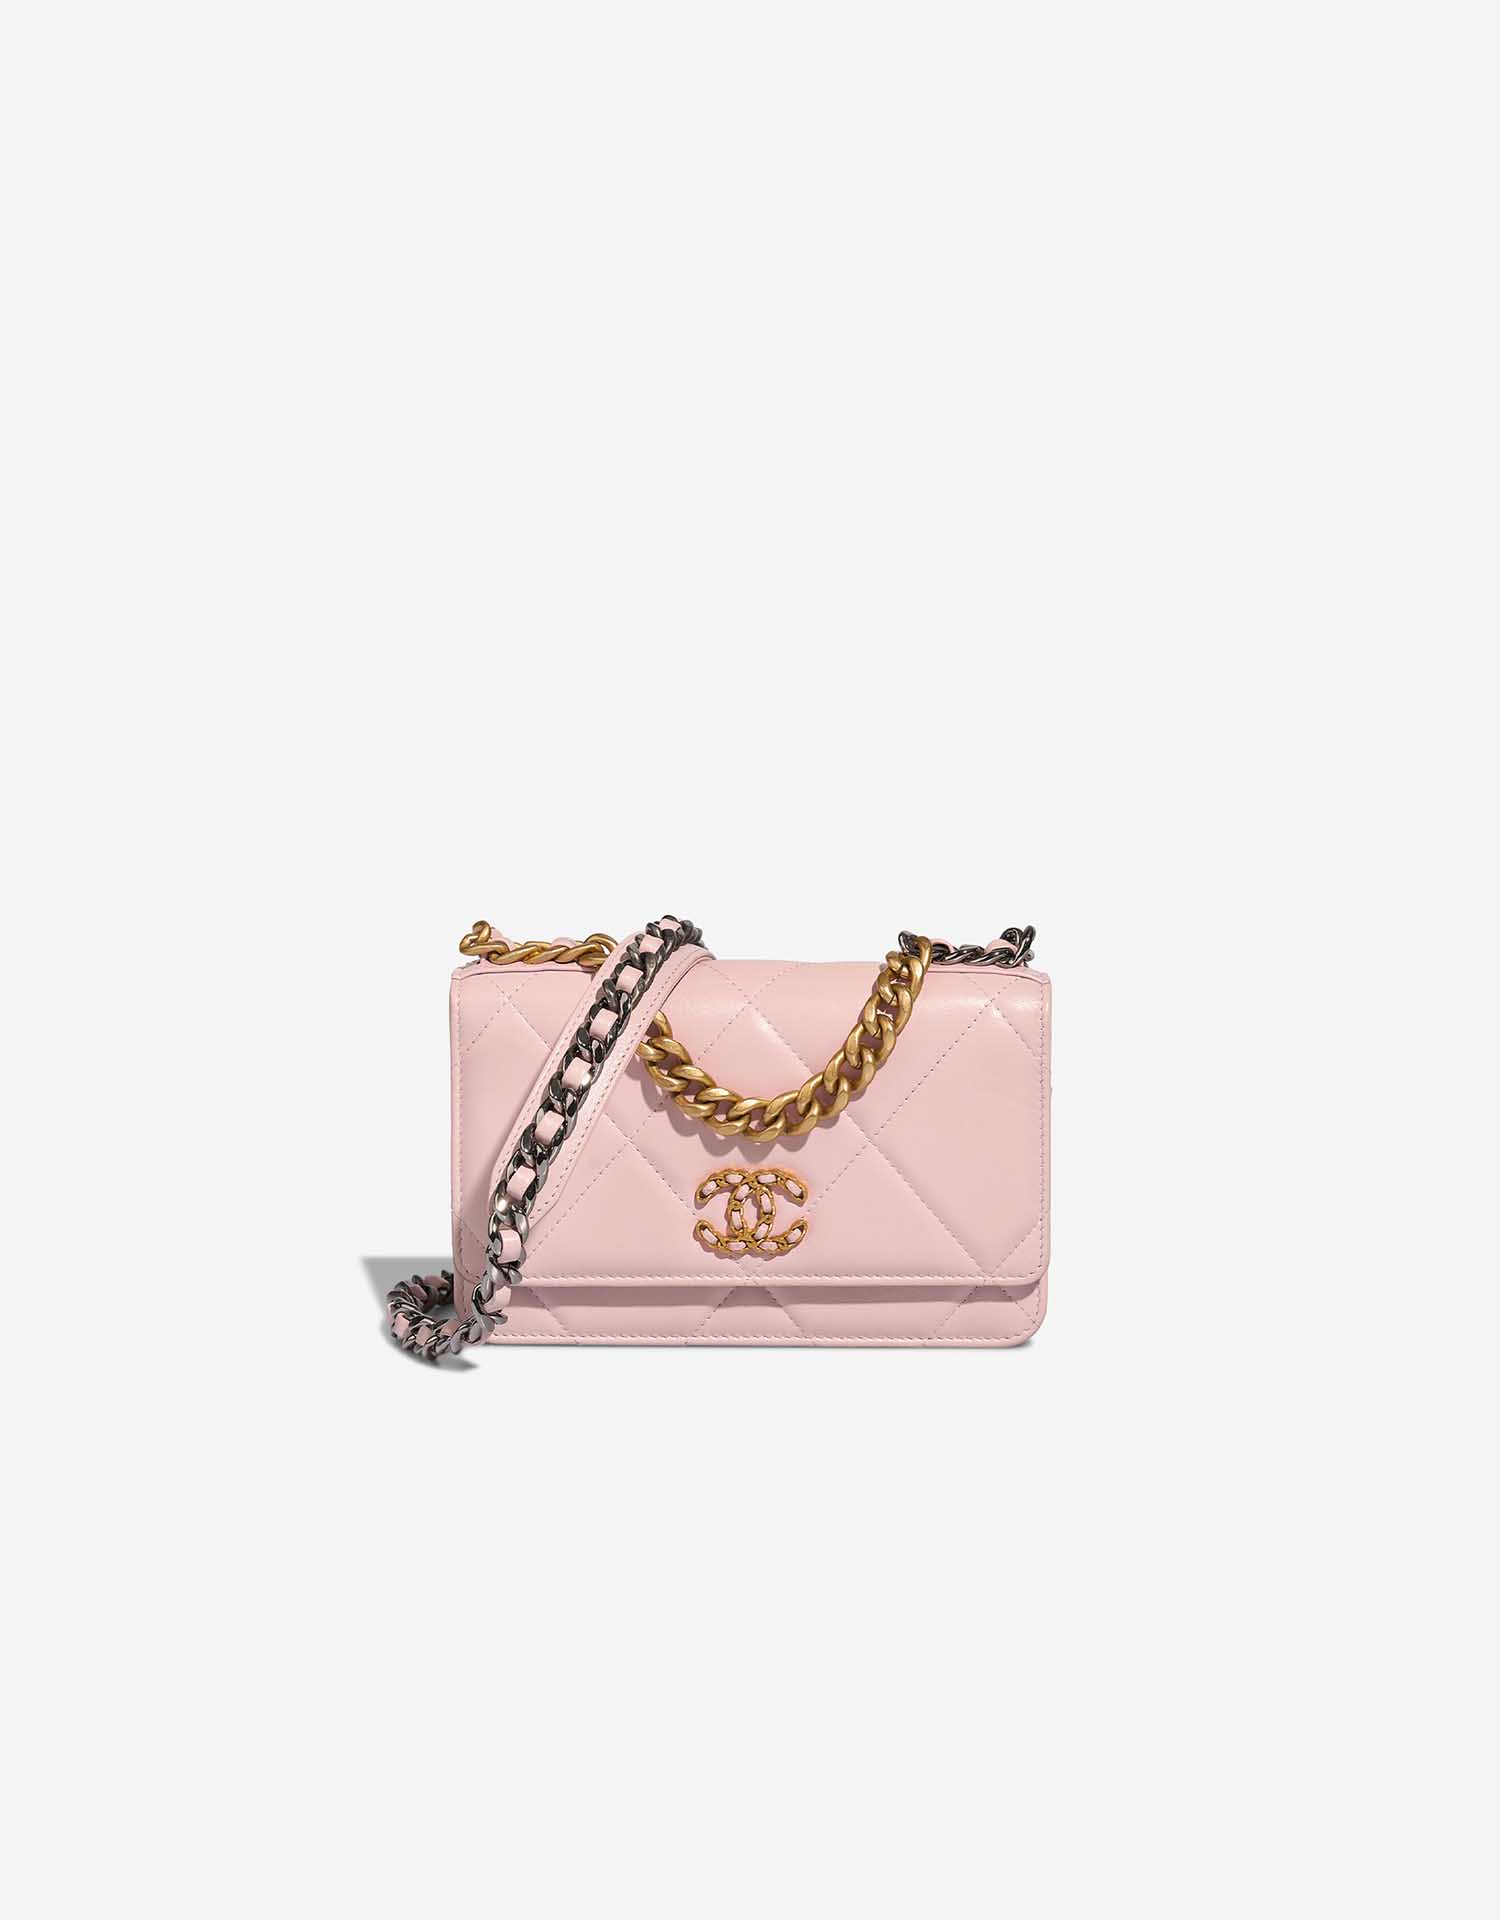 Chanel 19 Wallet On Chain Lamb Light Rose